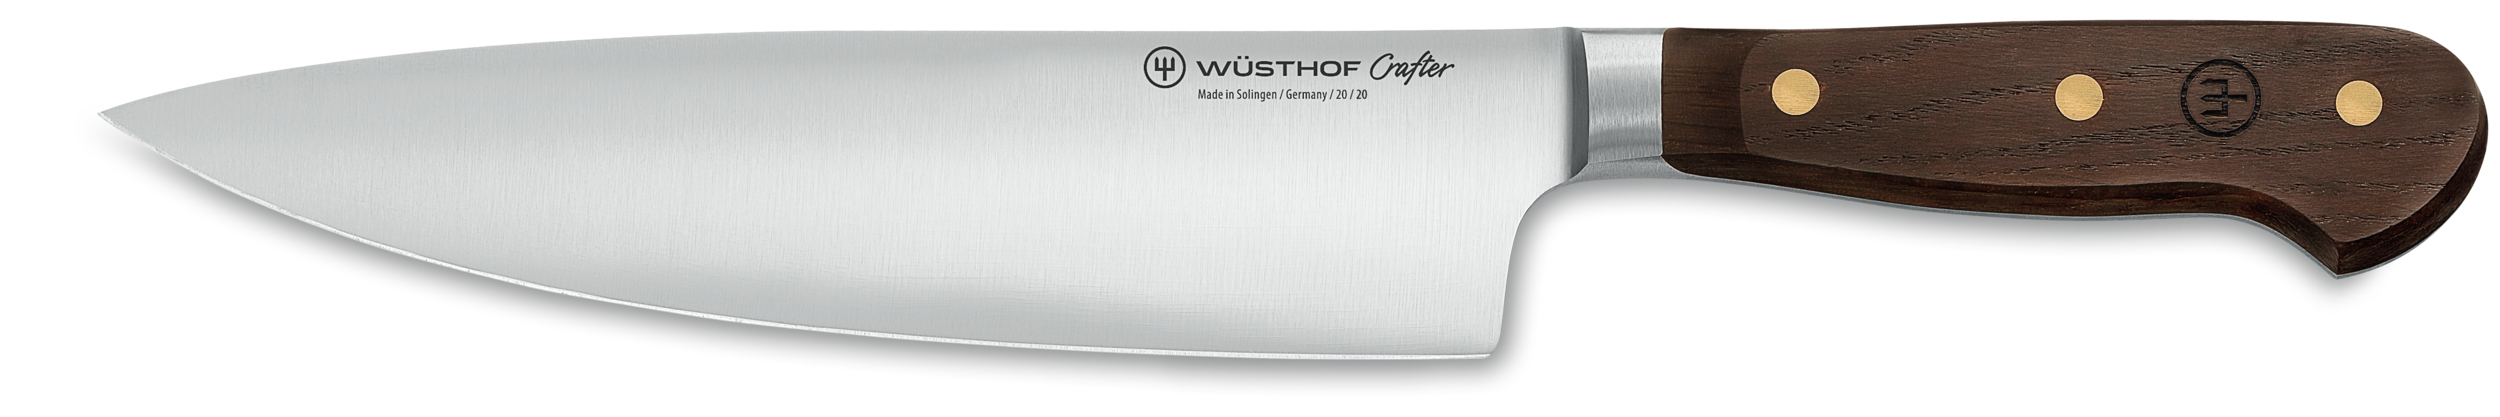 Wusthof Crafter